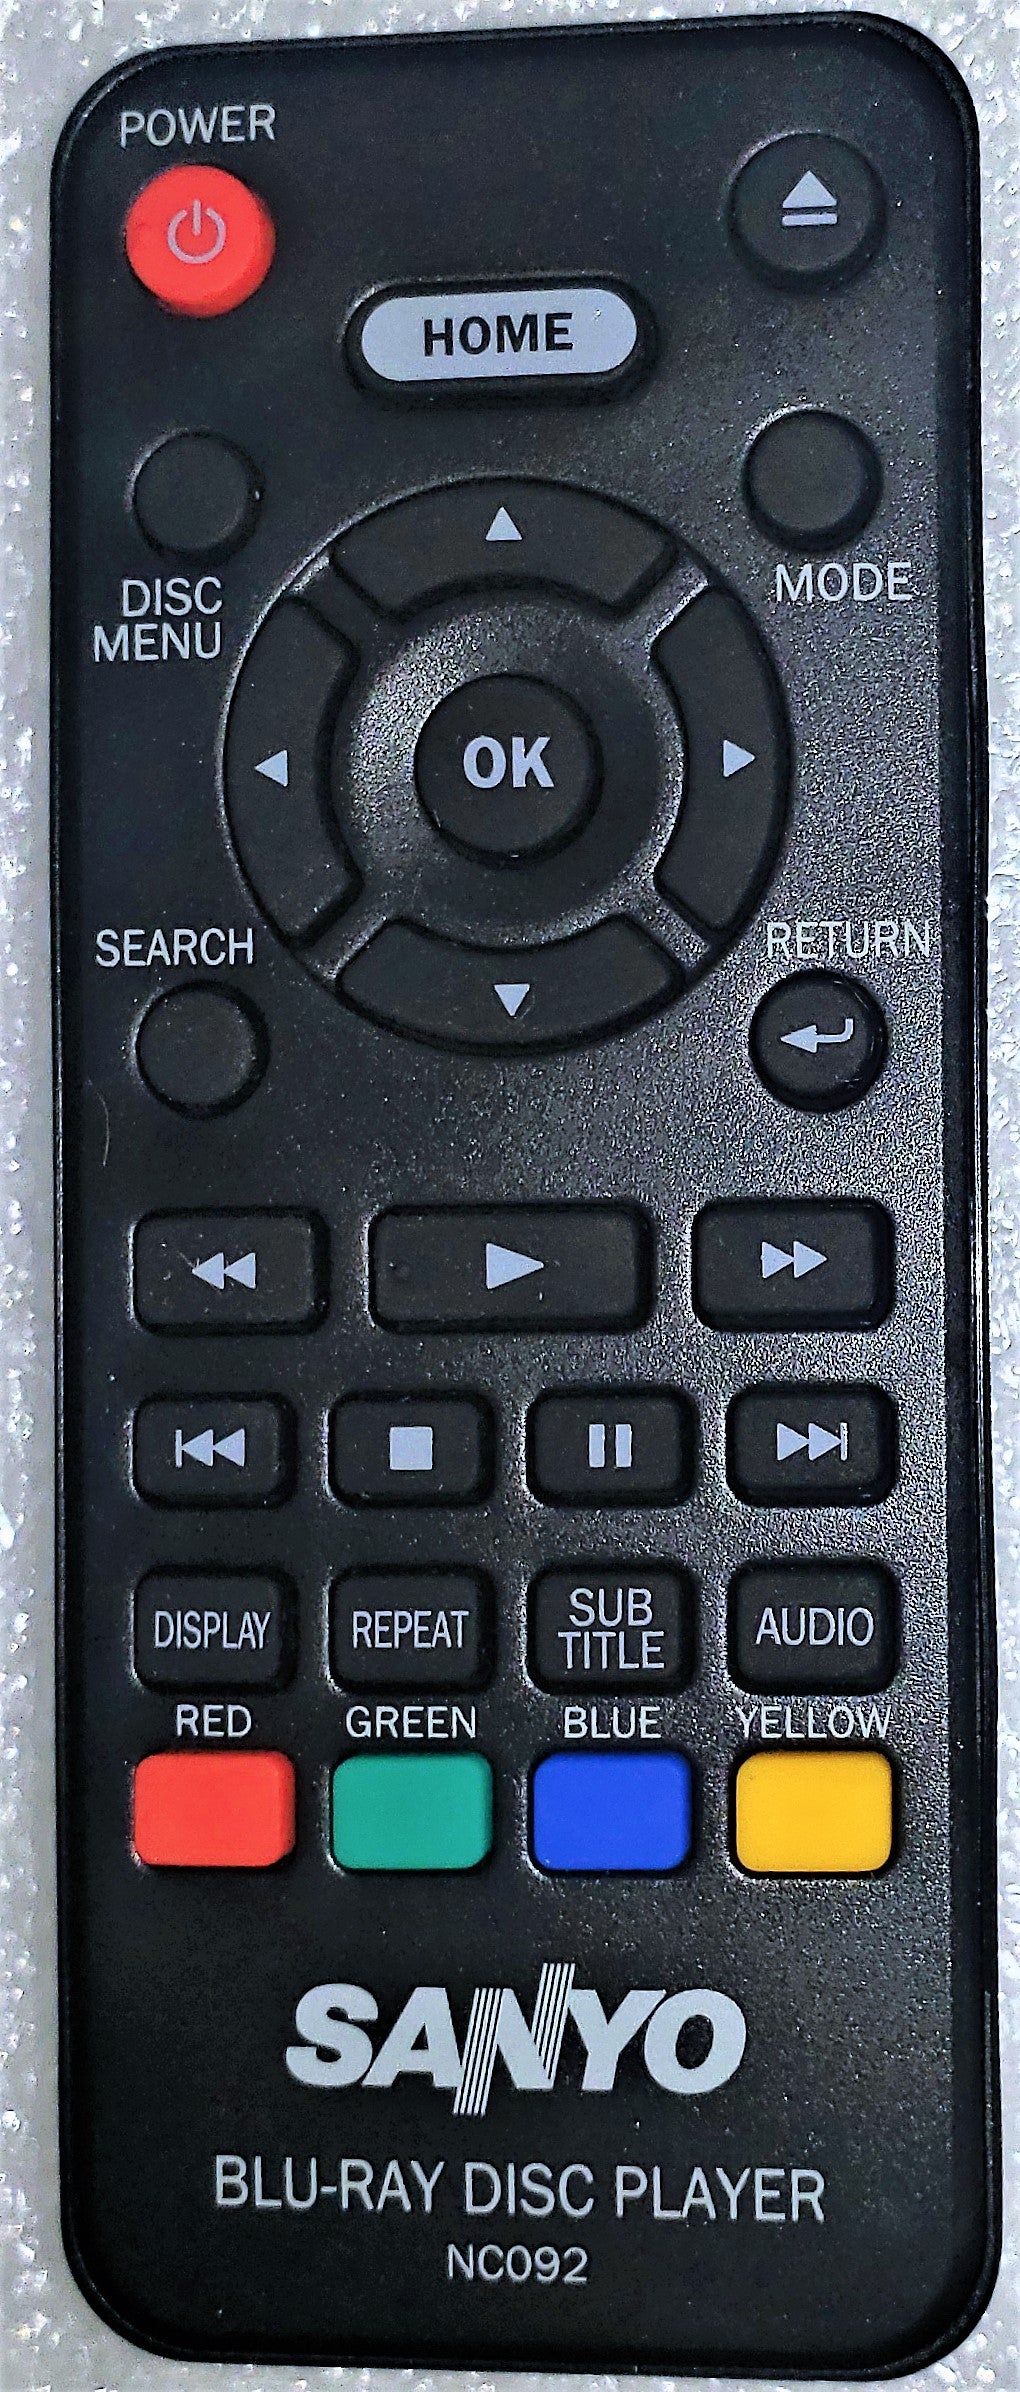 OEM replacement remote control for Sanyo Blu-ray players NC092UH